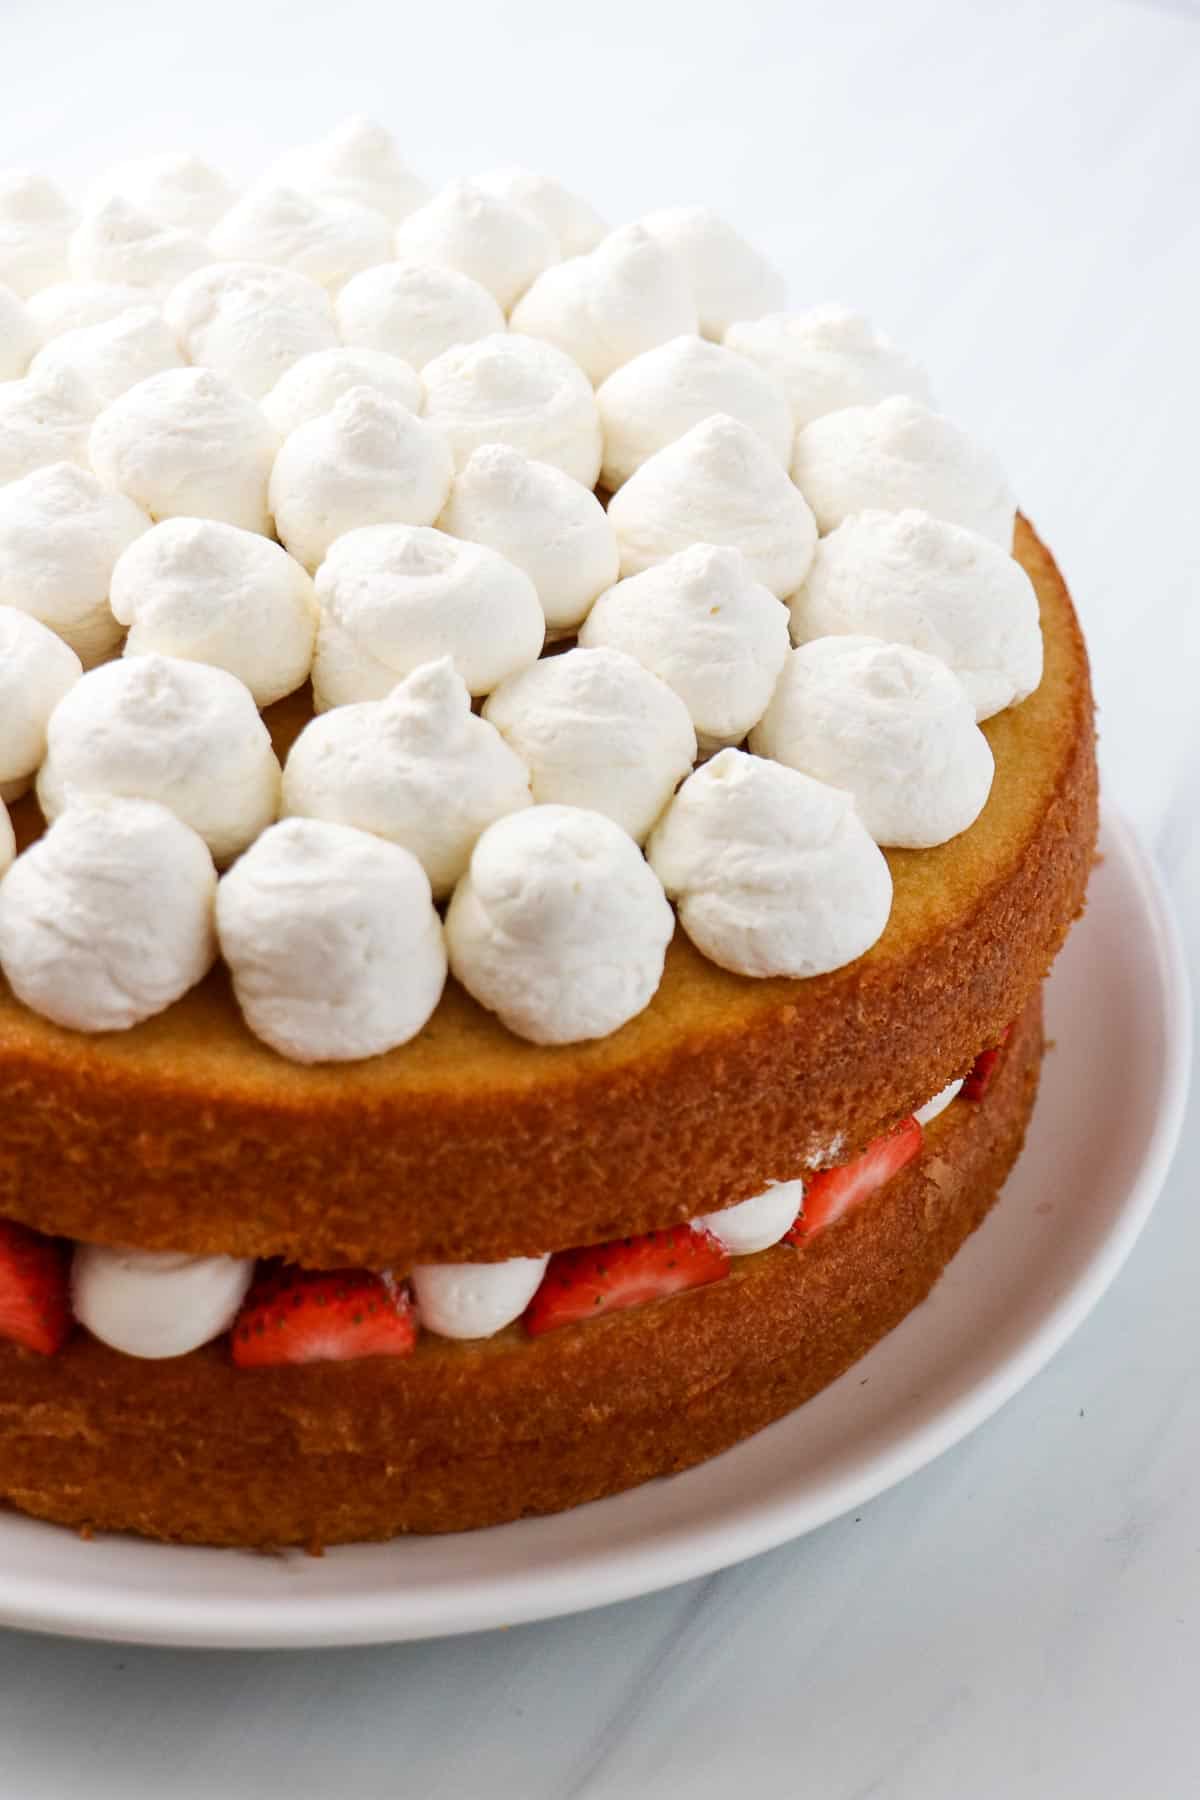 Vanilla layer cake topped with dollops of whipped cream.